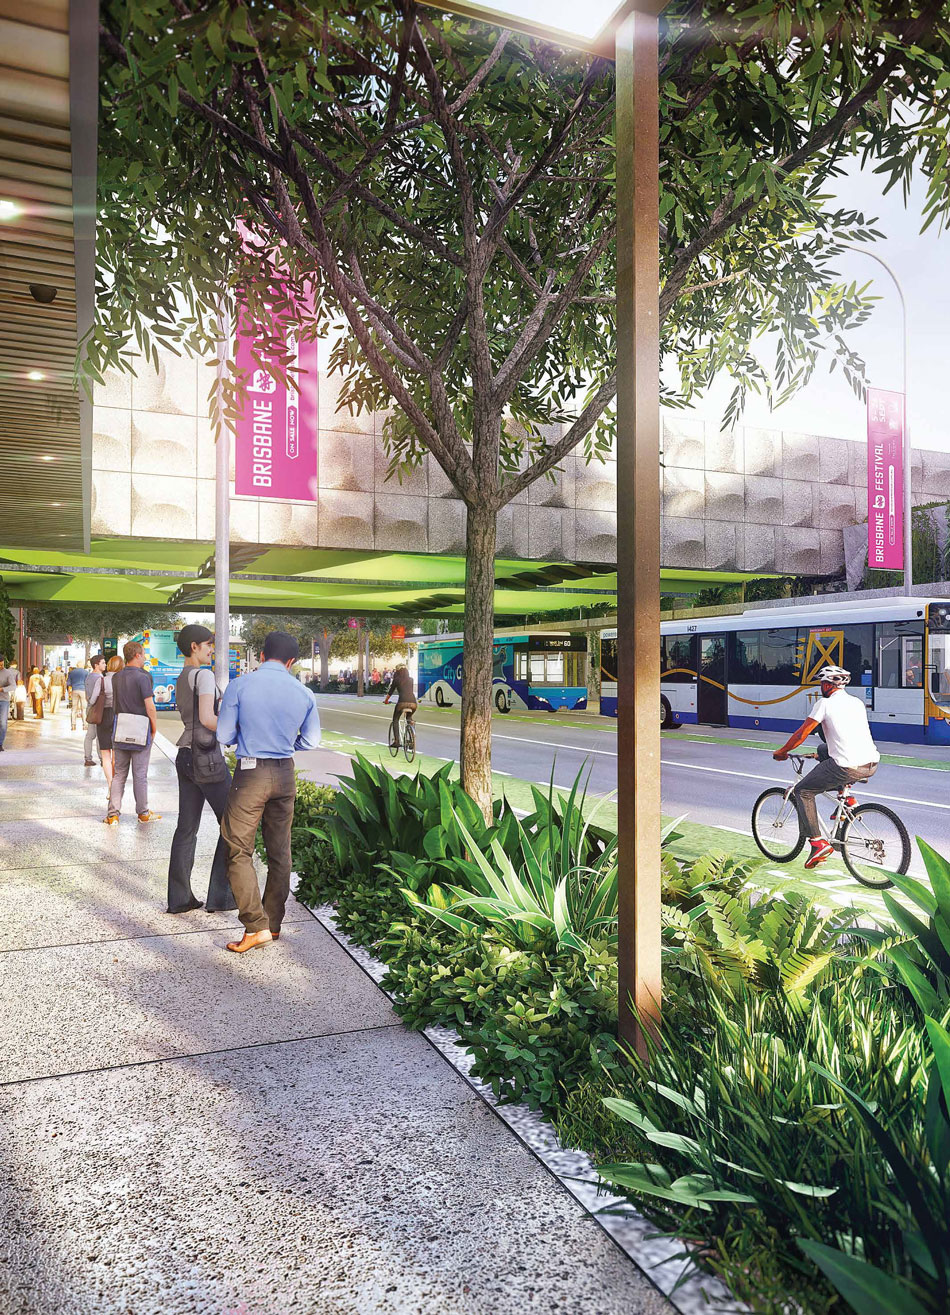 Artist's impression of the planned streets-cape along the Melbourne Street railway overpass